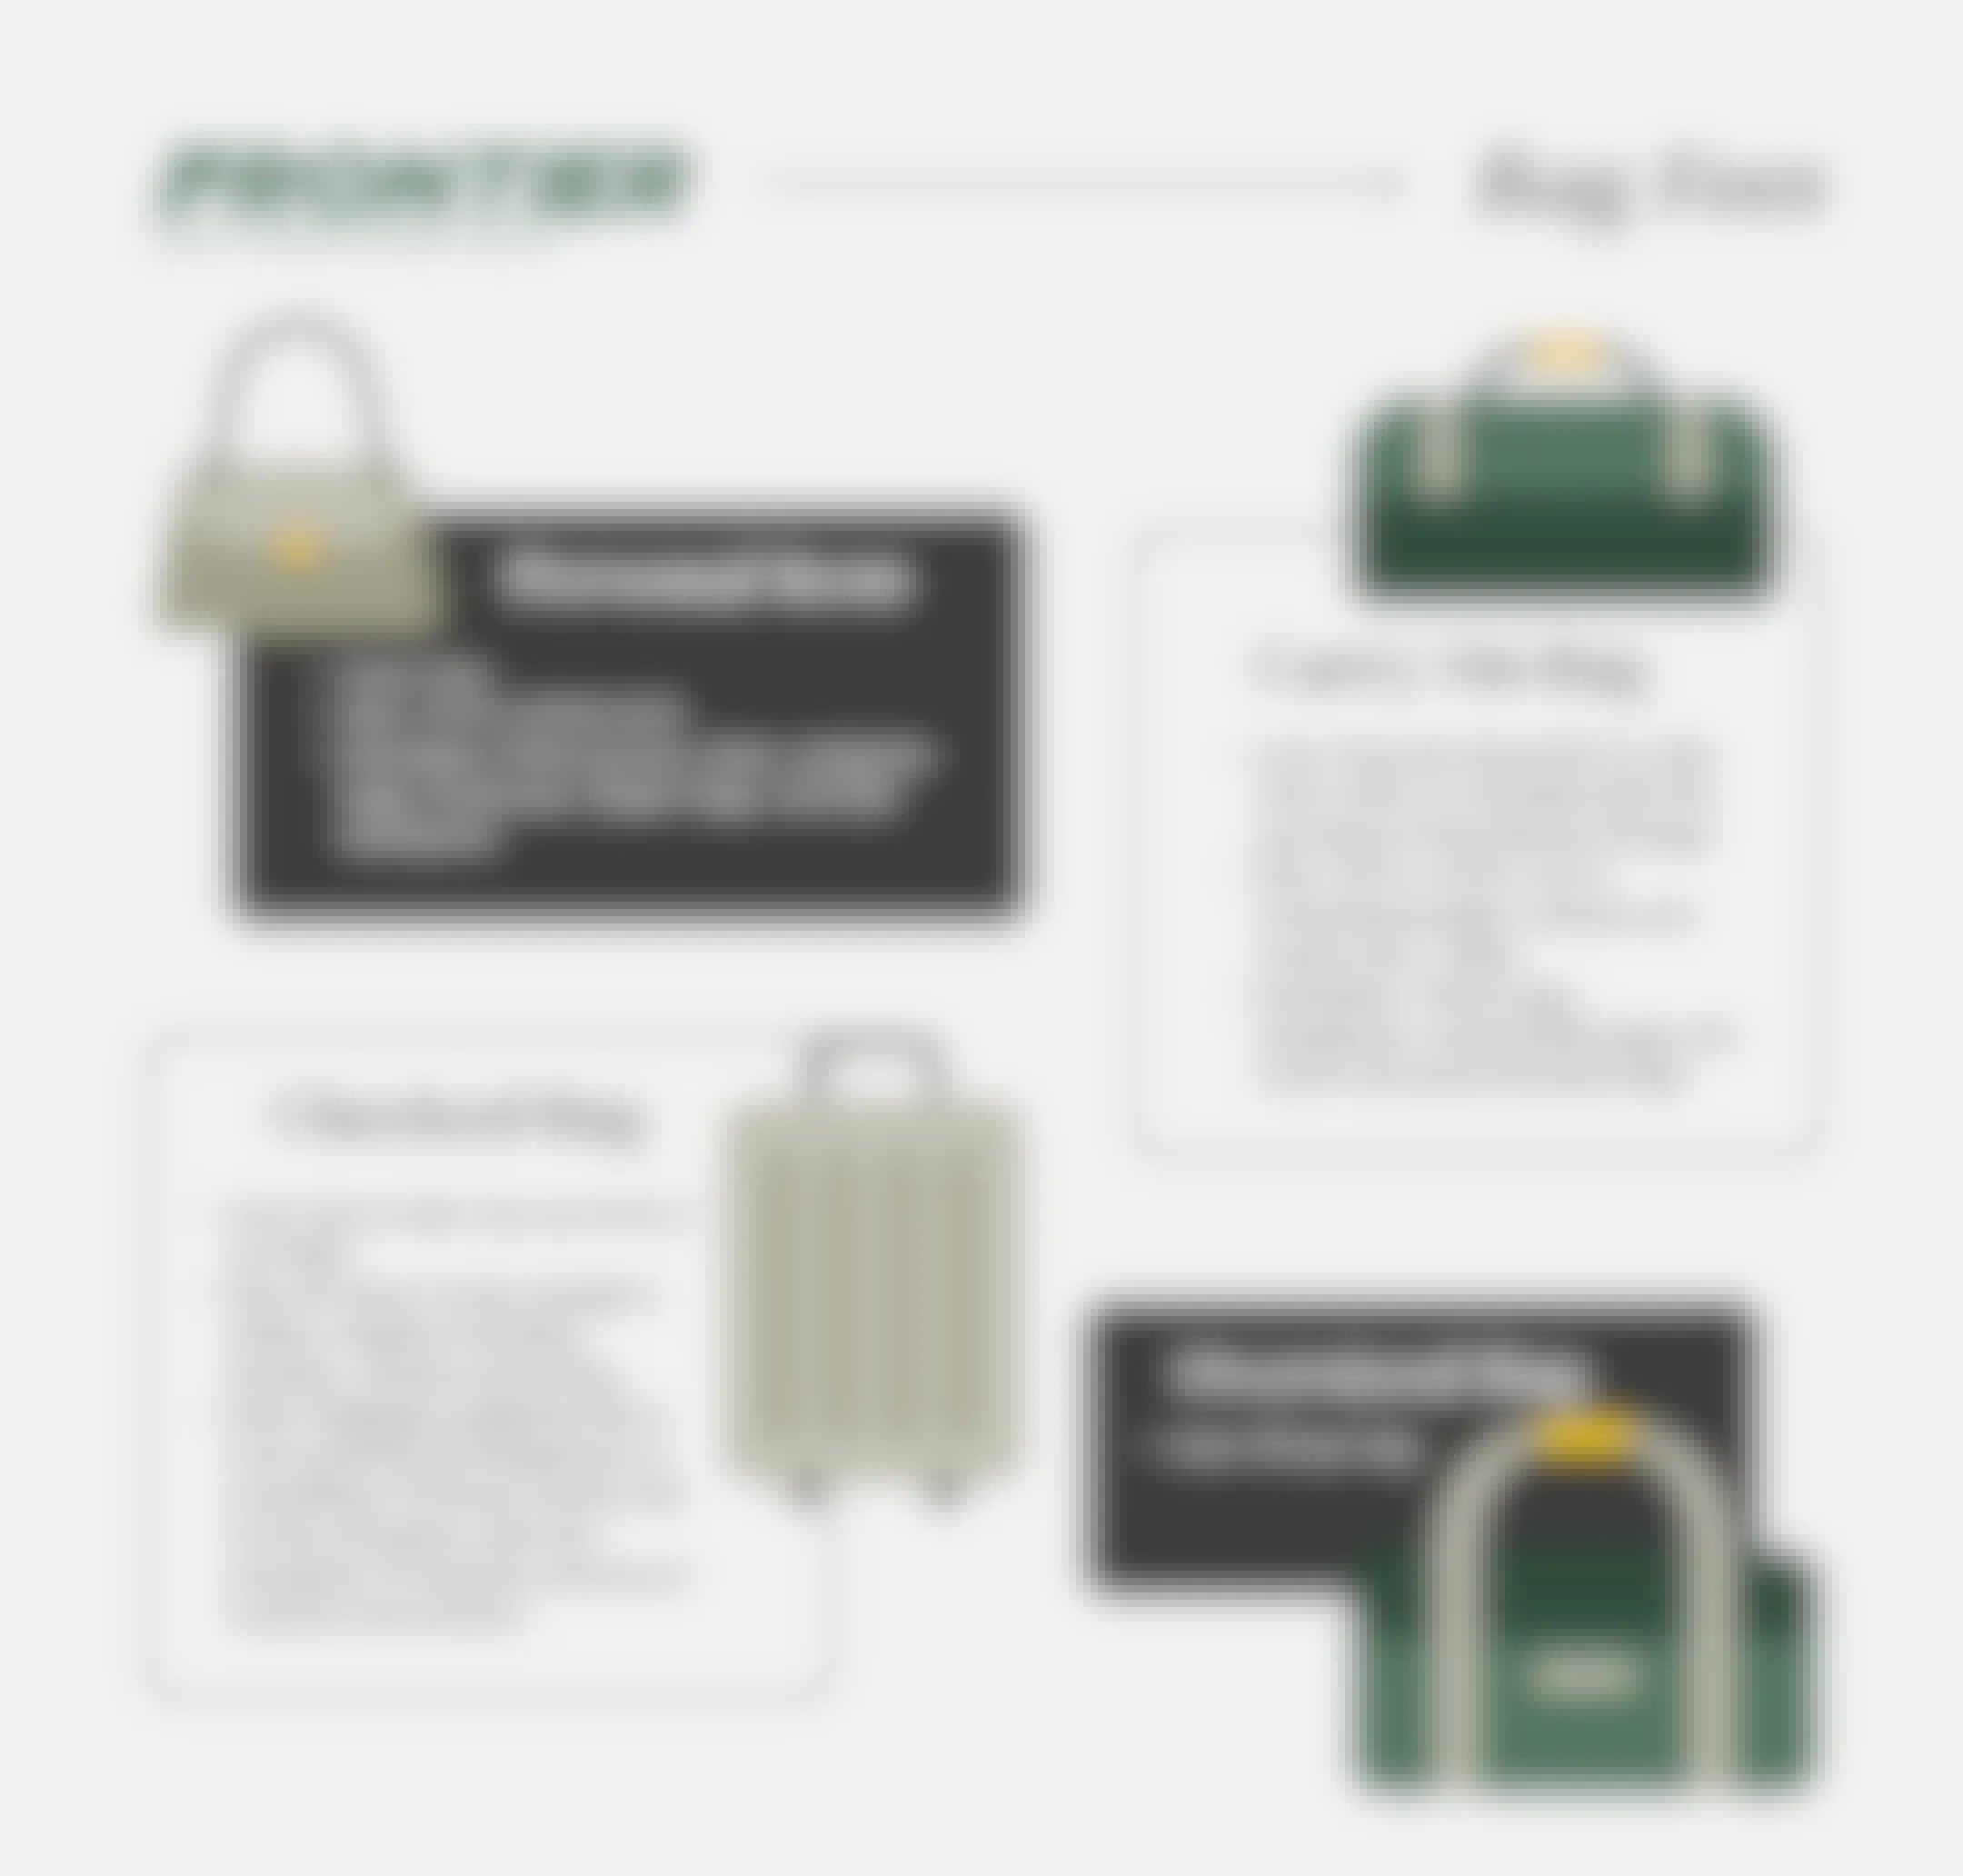 Frontier Airlines bag fees for personal items, carry-ons, and checked bags.